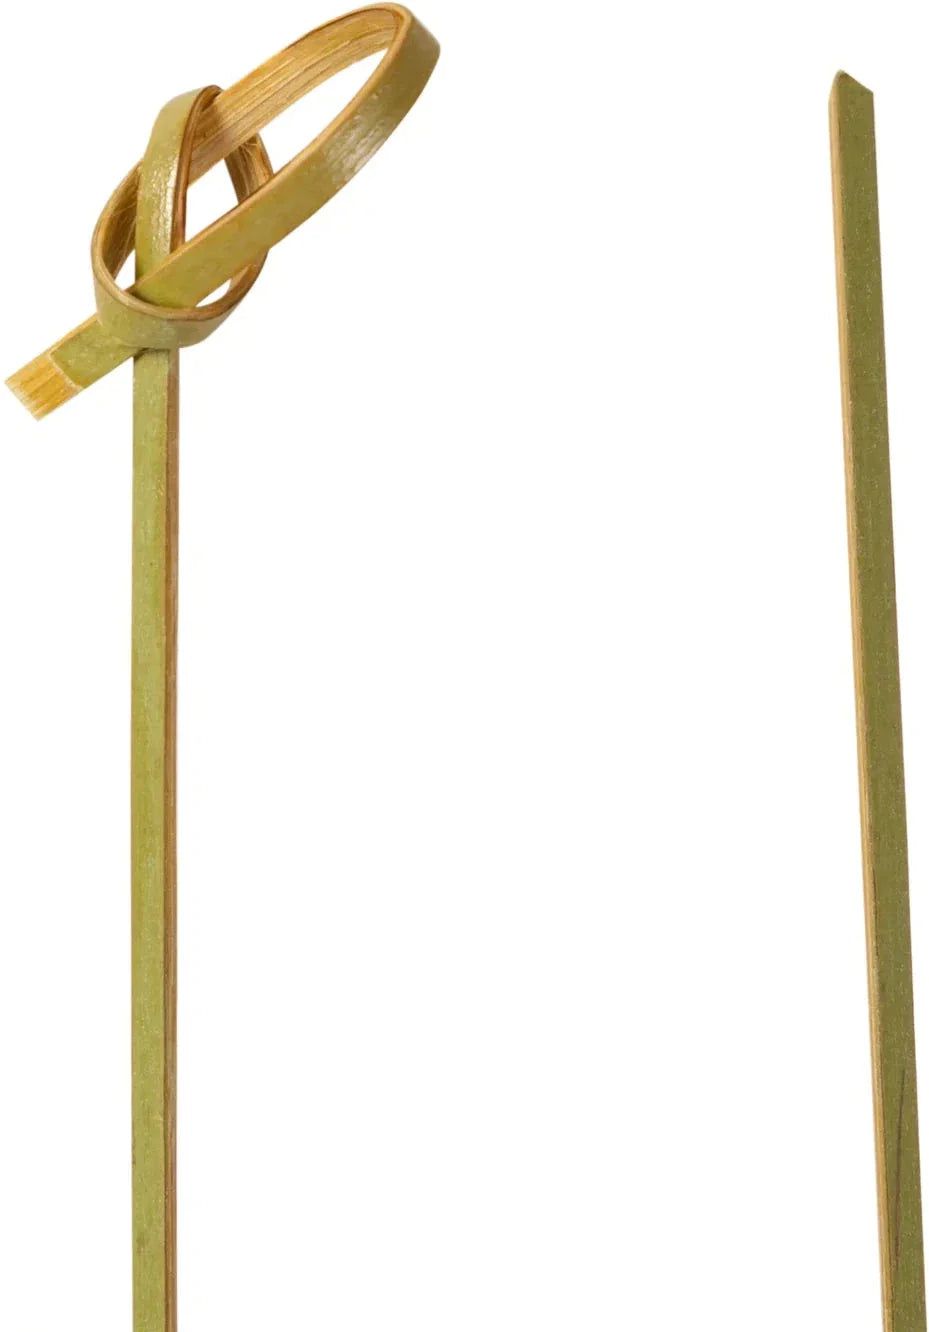 Hy-Stix - 4" Bamboo Knotted Skewer, 1000/Cs - 82-084KN-RP